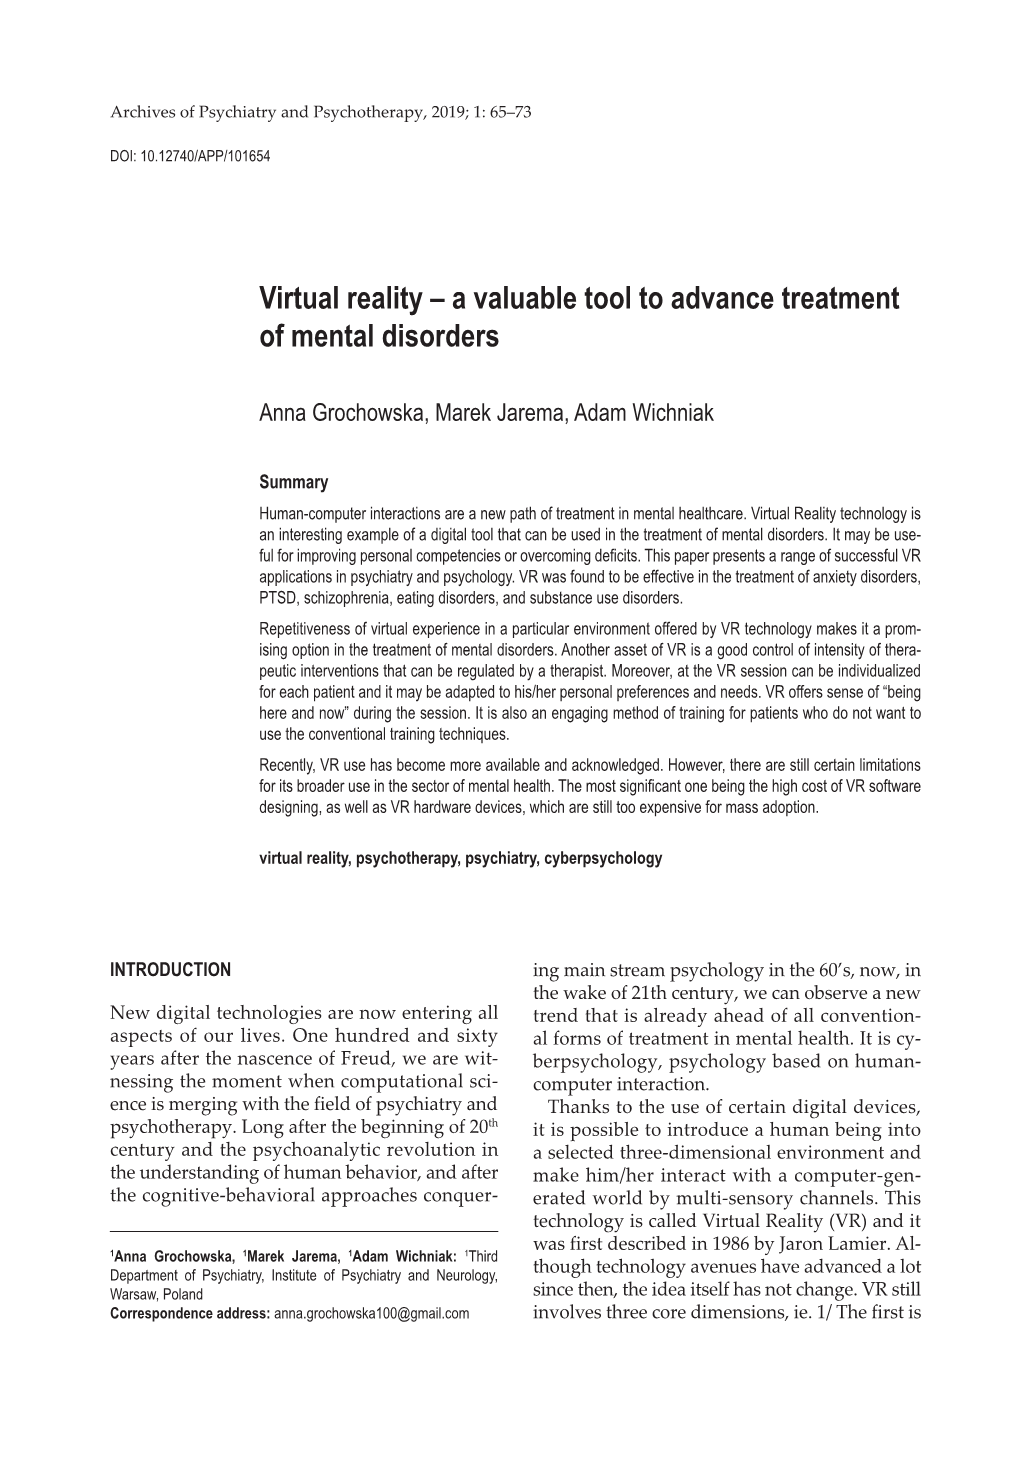 Virtual Reality – a Valuable Tool to Advance Treatment of Mental Disorders